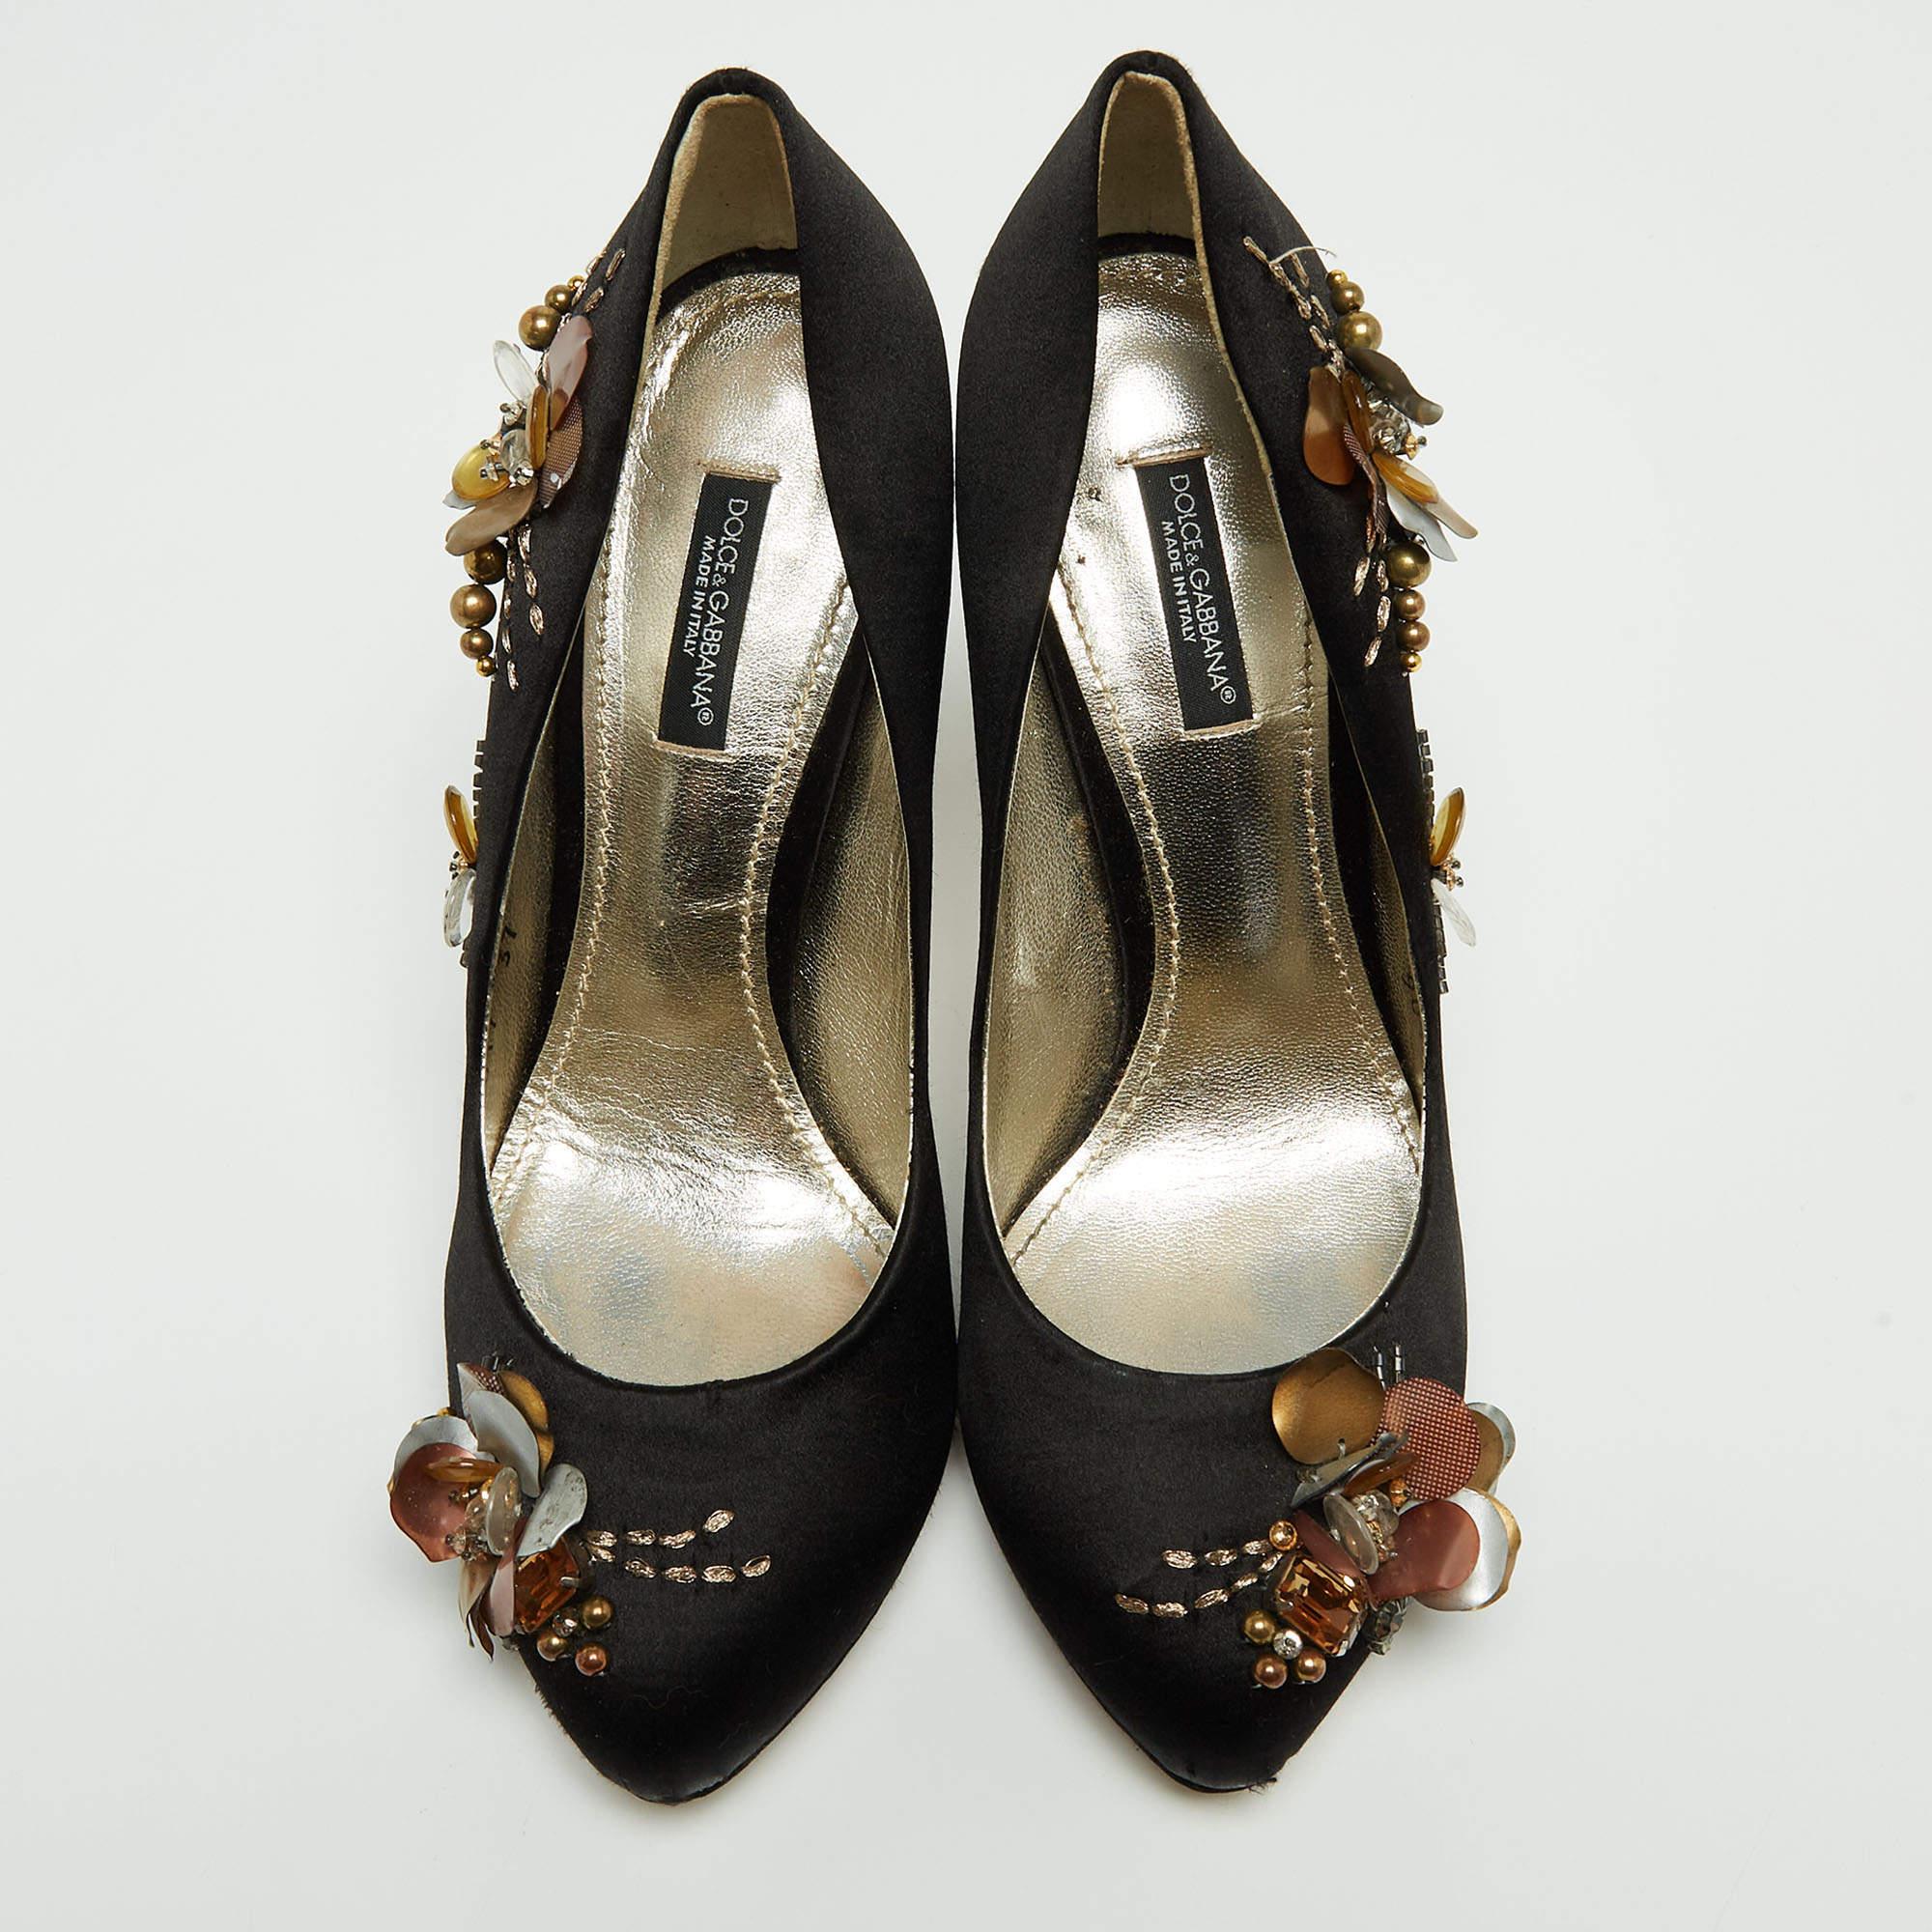 The fashion house’s tradition of excellence, coupled with modern design sensibilities, works to make these Dolce & Gabbana black satin pumps a fabulous choice. They'll help you deliver a chic look with ease.

